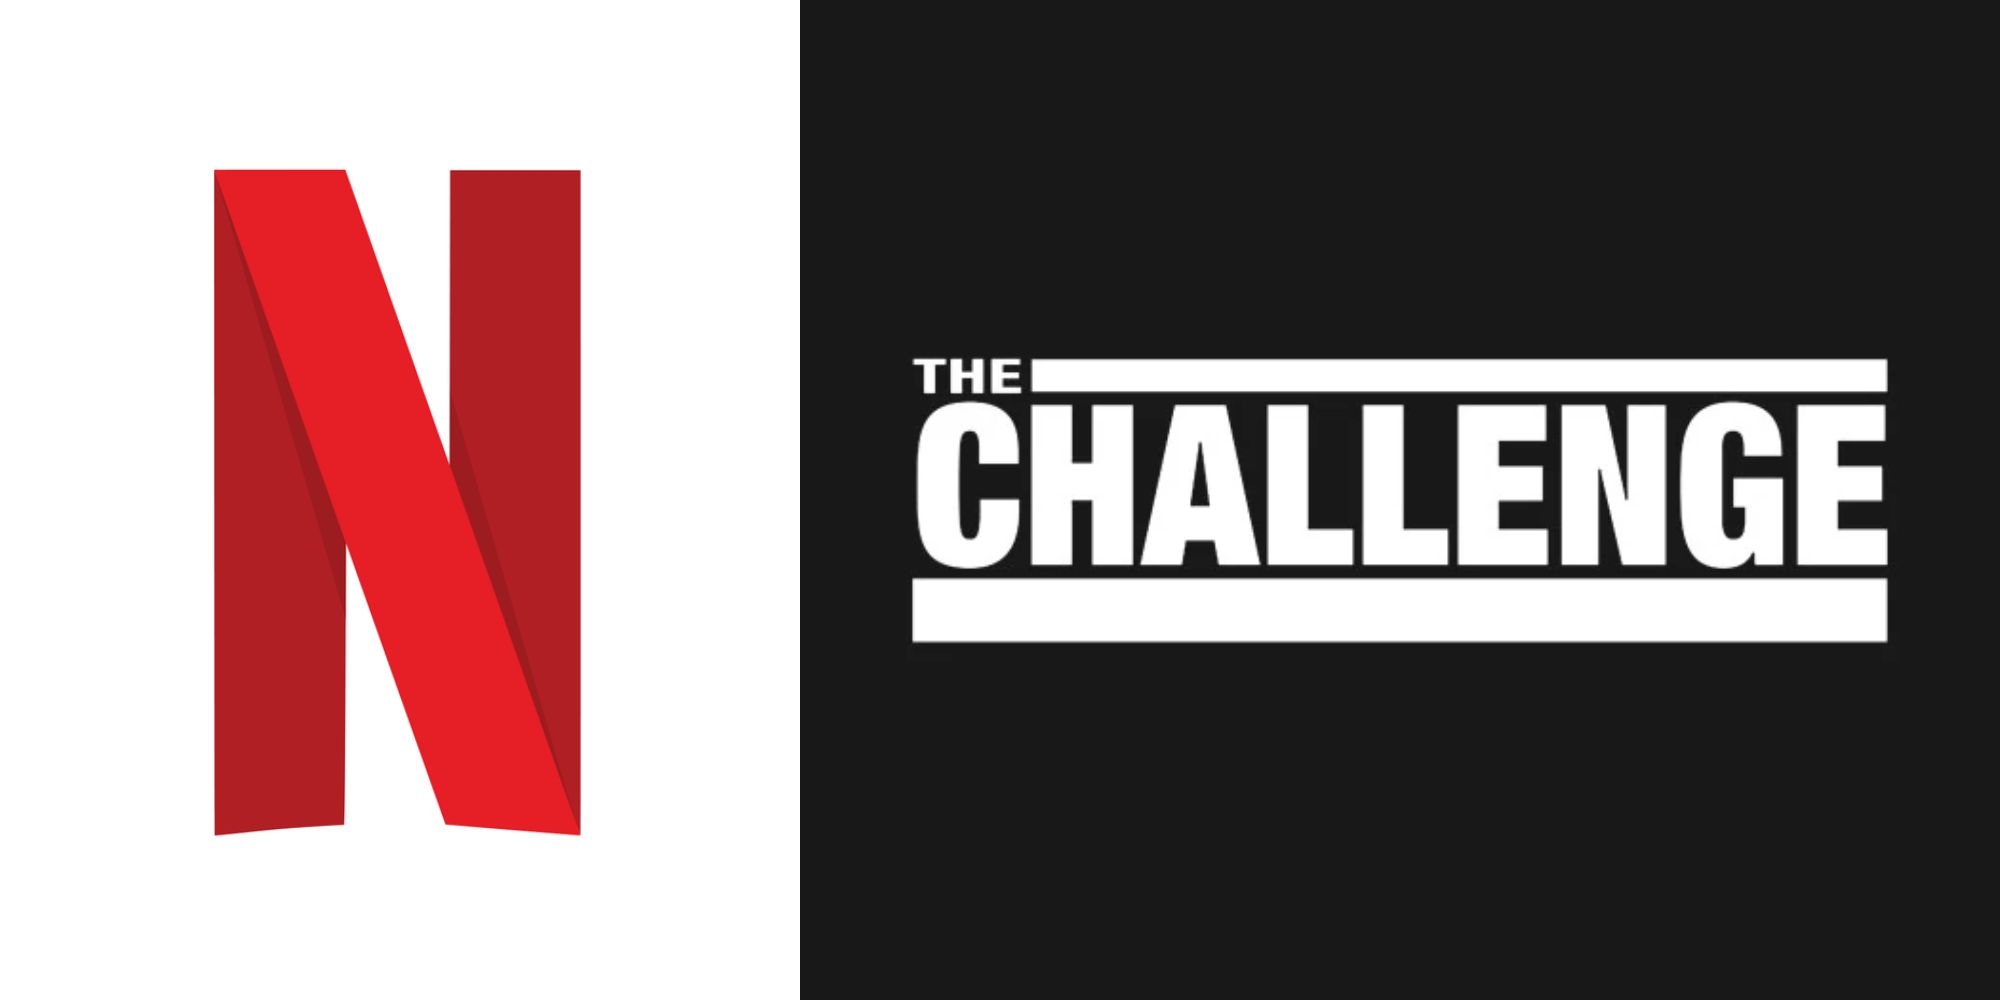 Netflix rumored to be making similar show to The Challenge